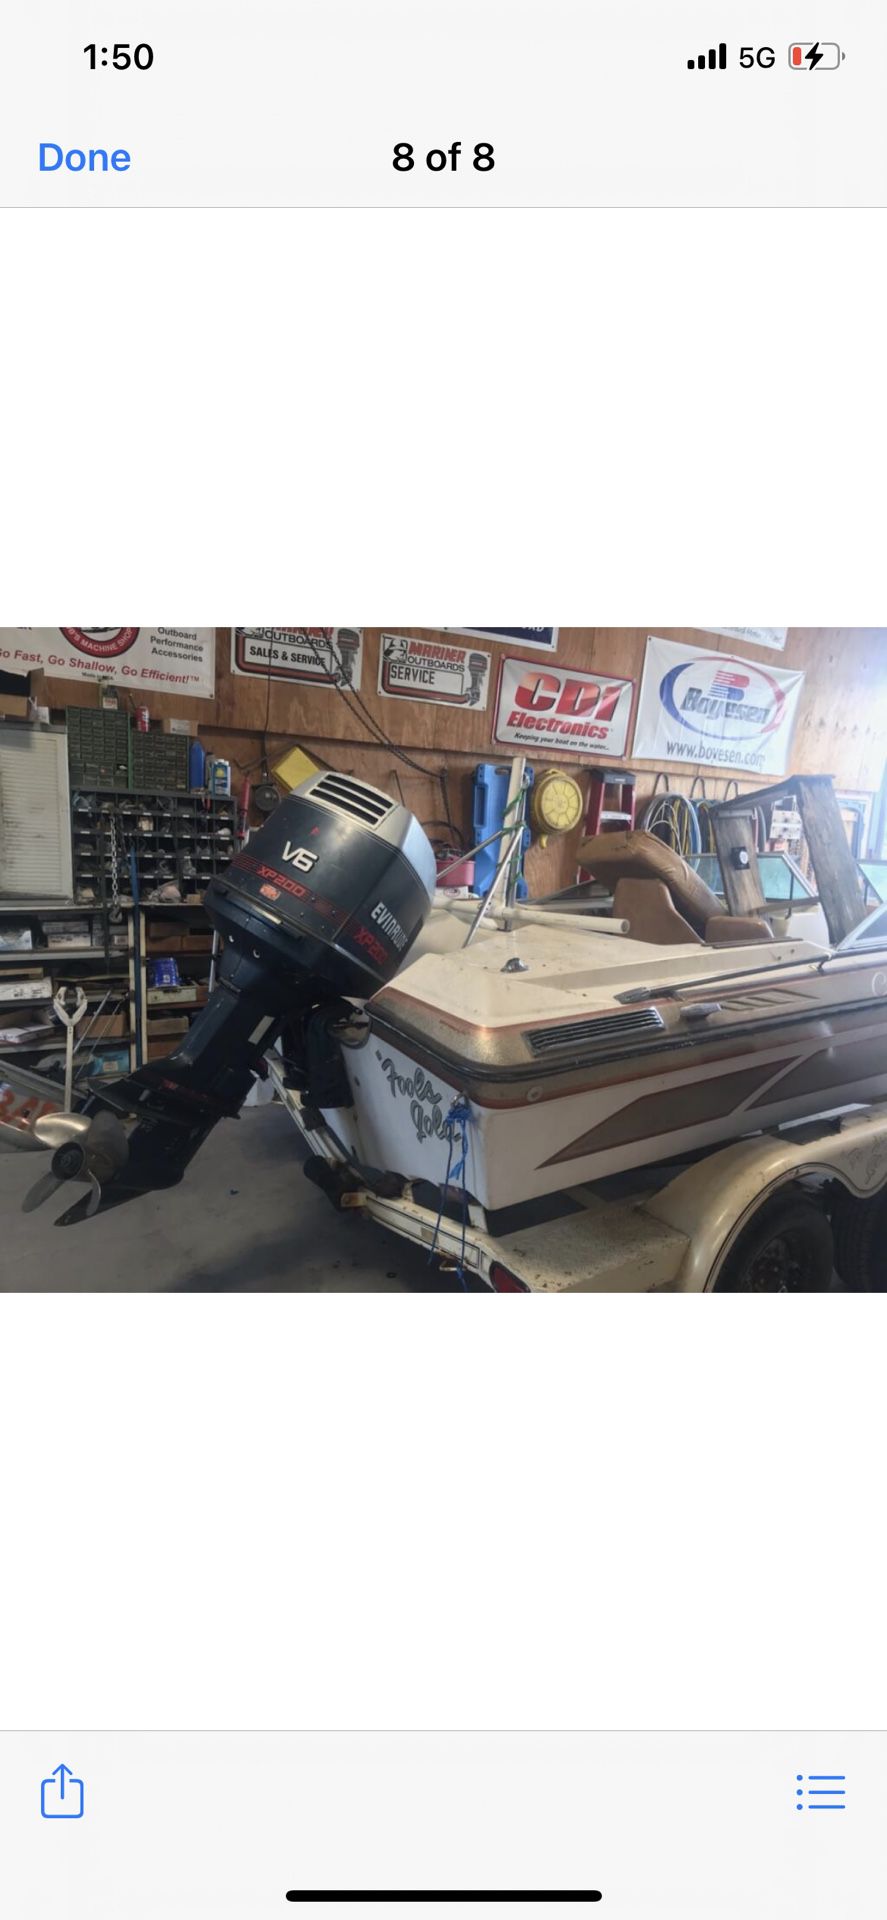 18 Ft Custom Boat With Great Trailer And 200 Evenrude 